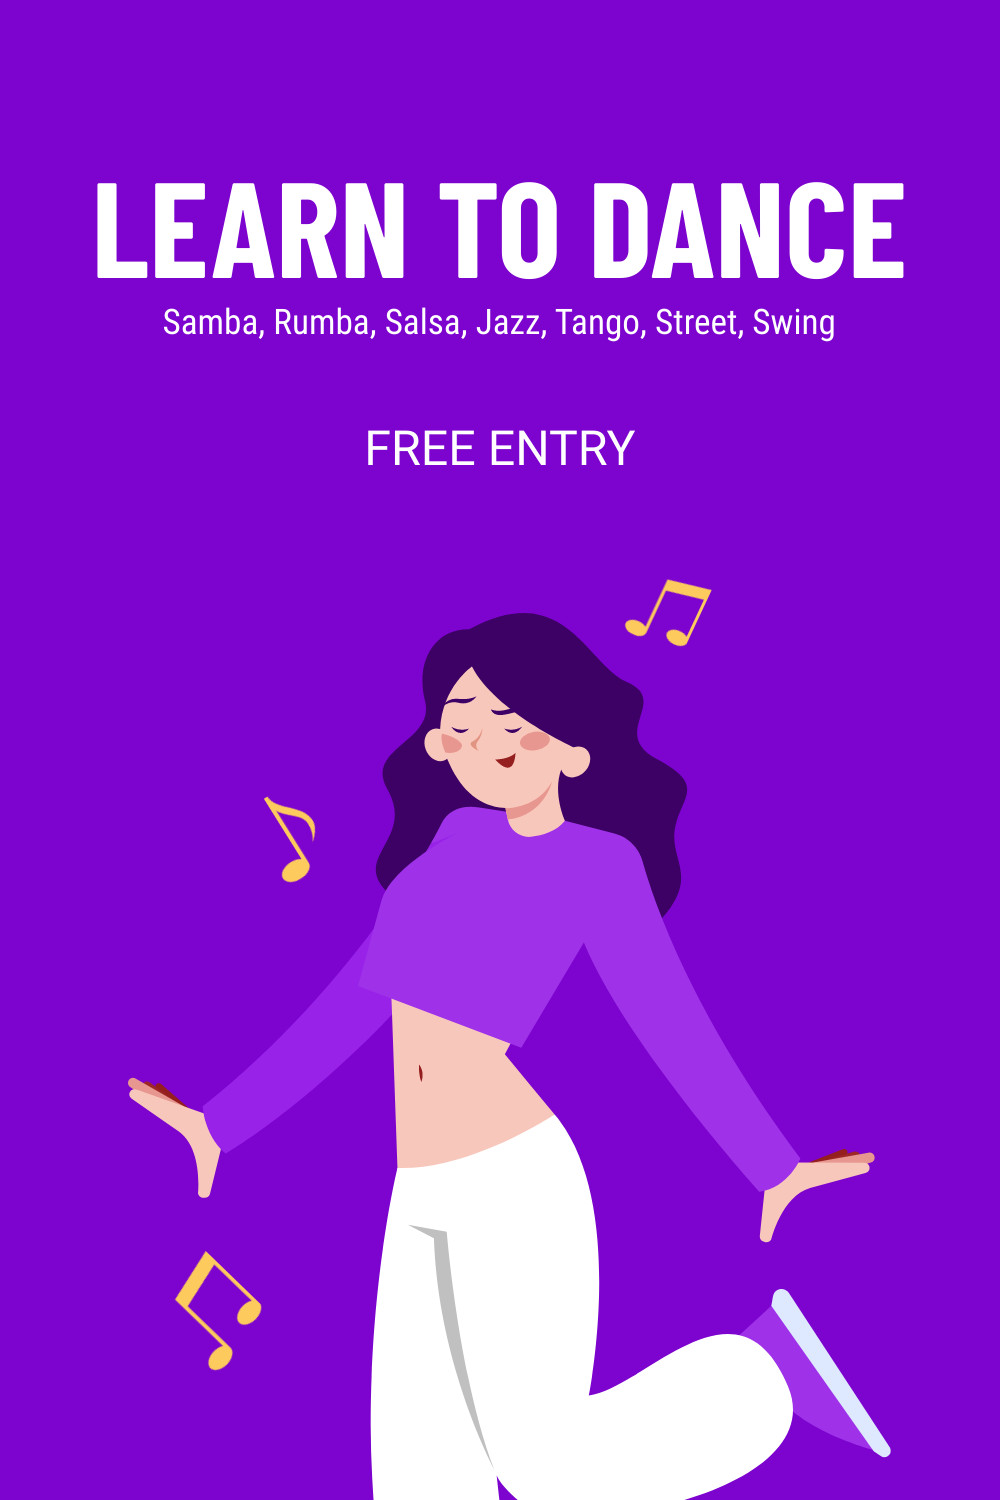 Learn to Dance with Free Entry